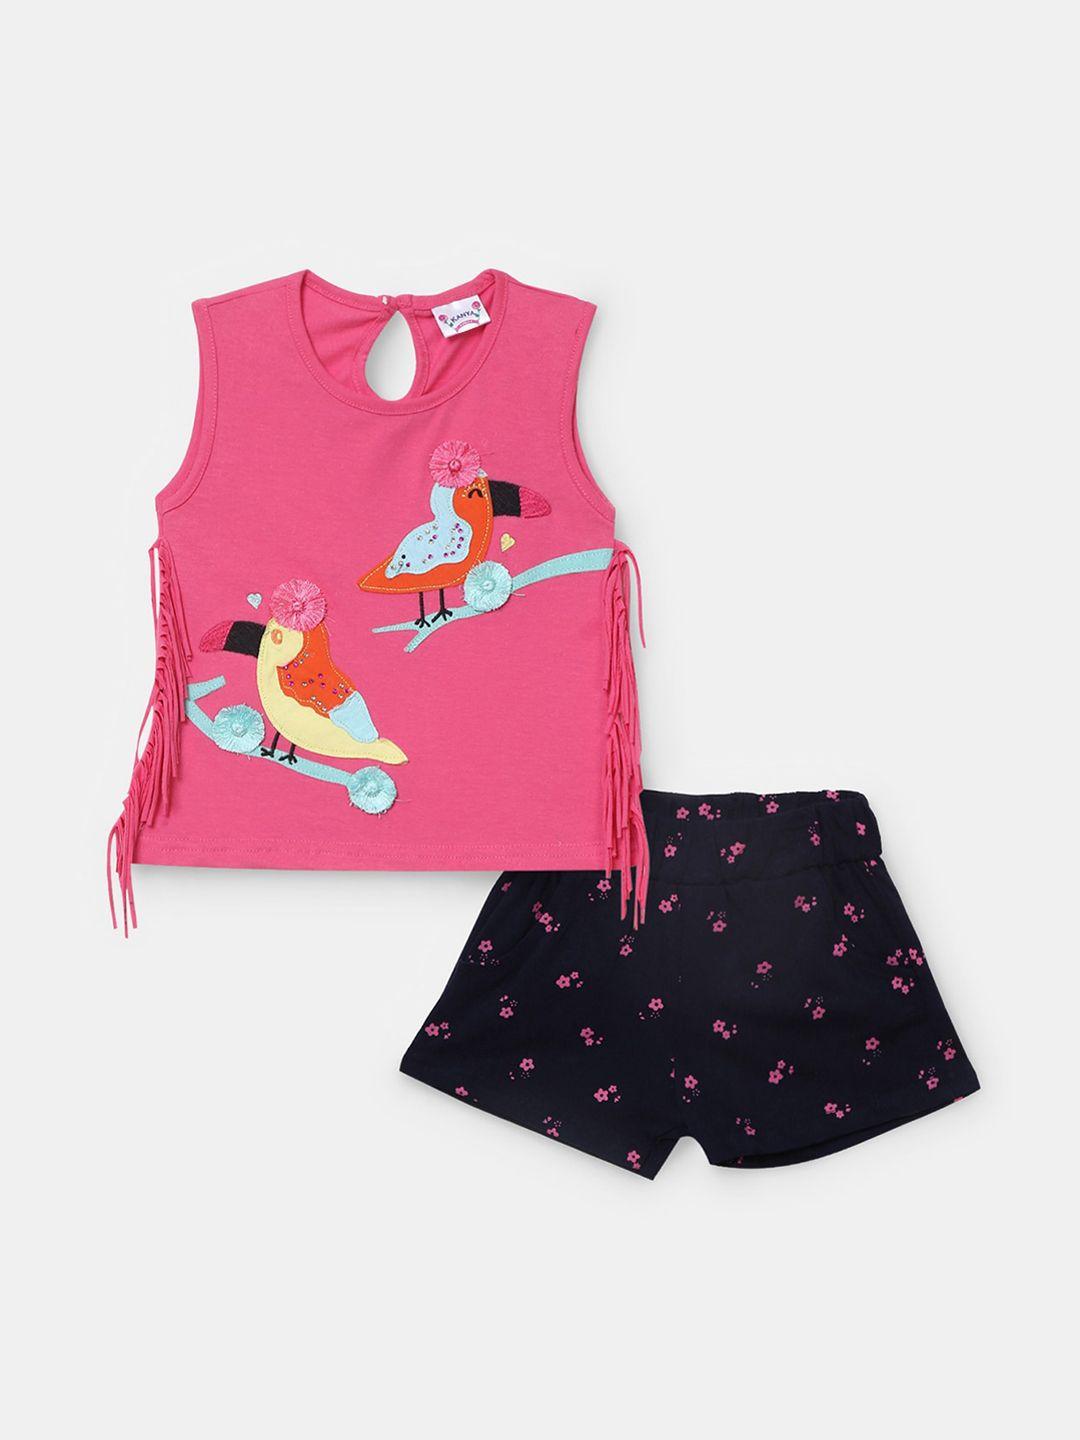 v-mart girls printed pure cotton t-shirt with shorts